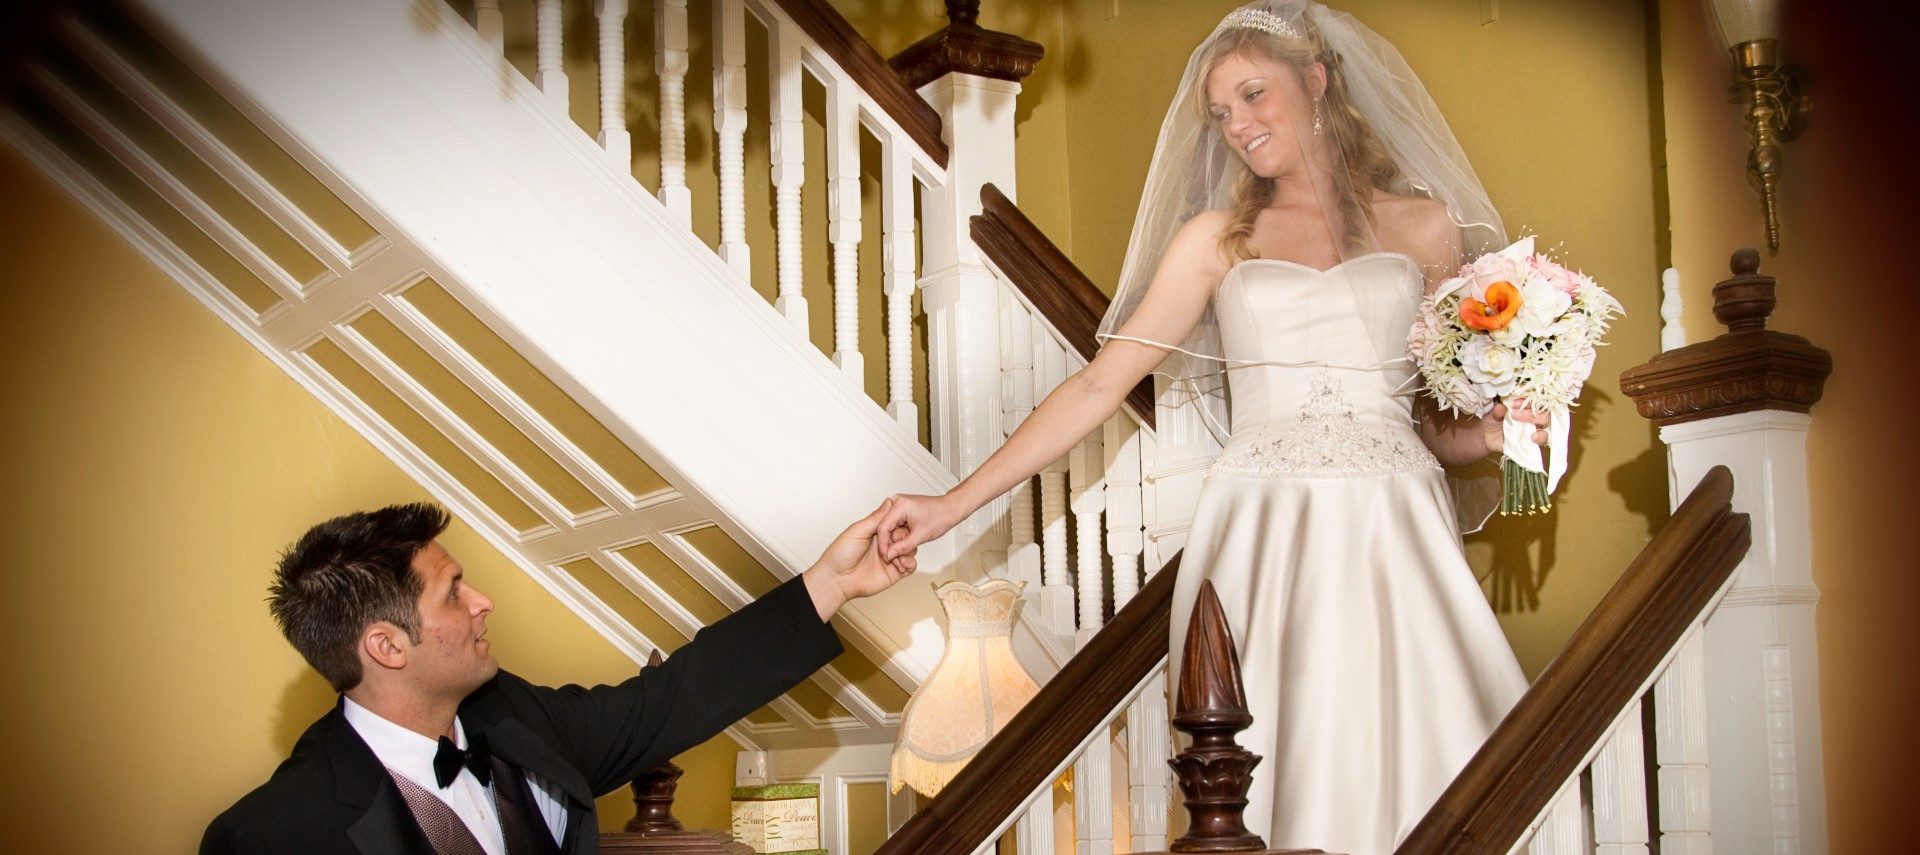 A bride standing on a staircase holding hands and looking down at her groom below